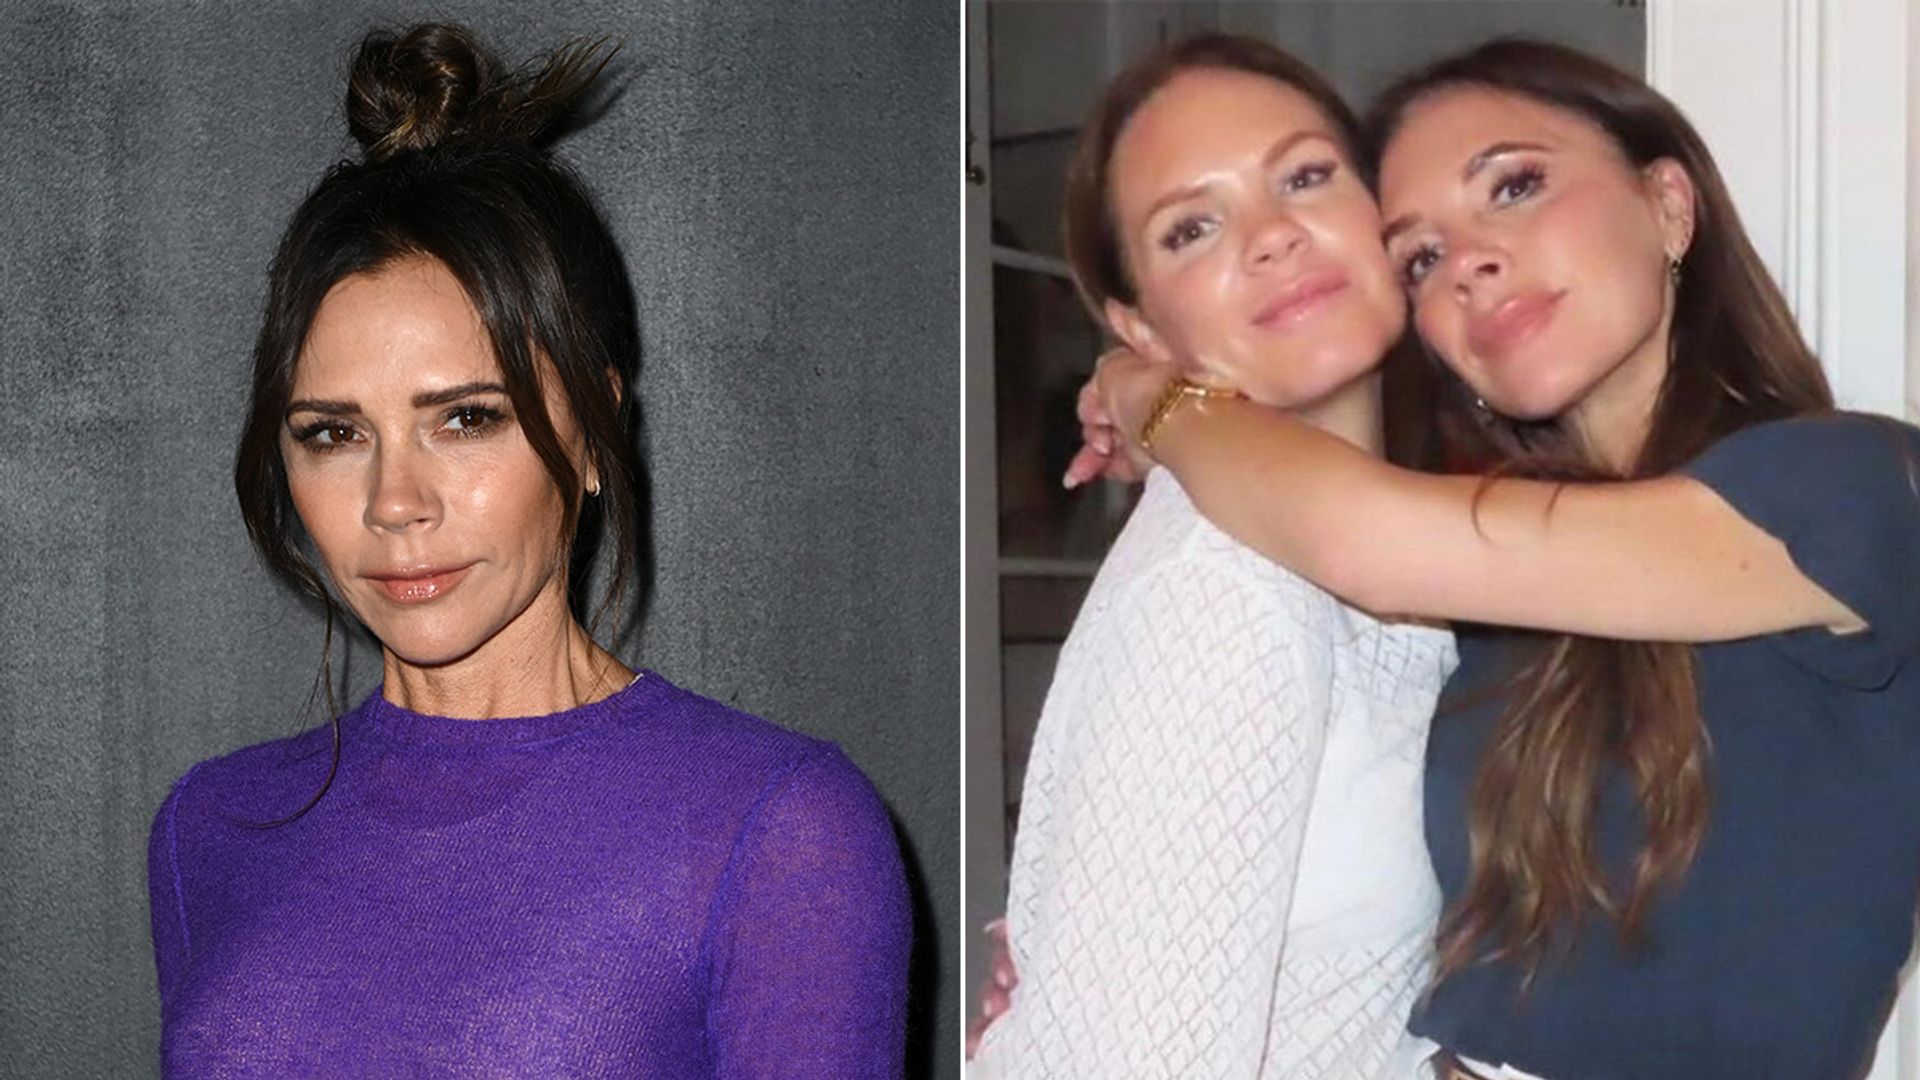 Victoria Beckham's sweetest moments with rarely-seen brother and lookalike sister